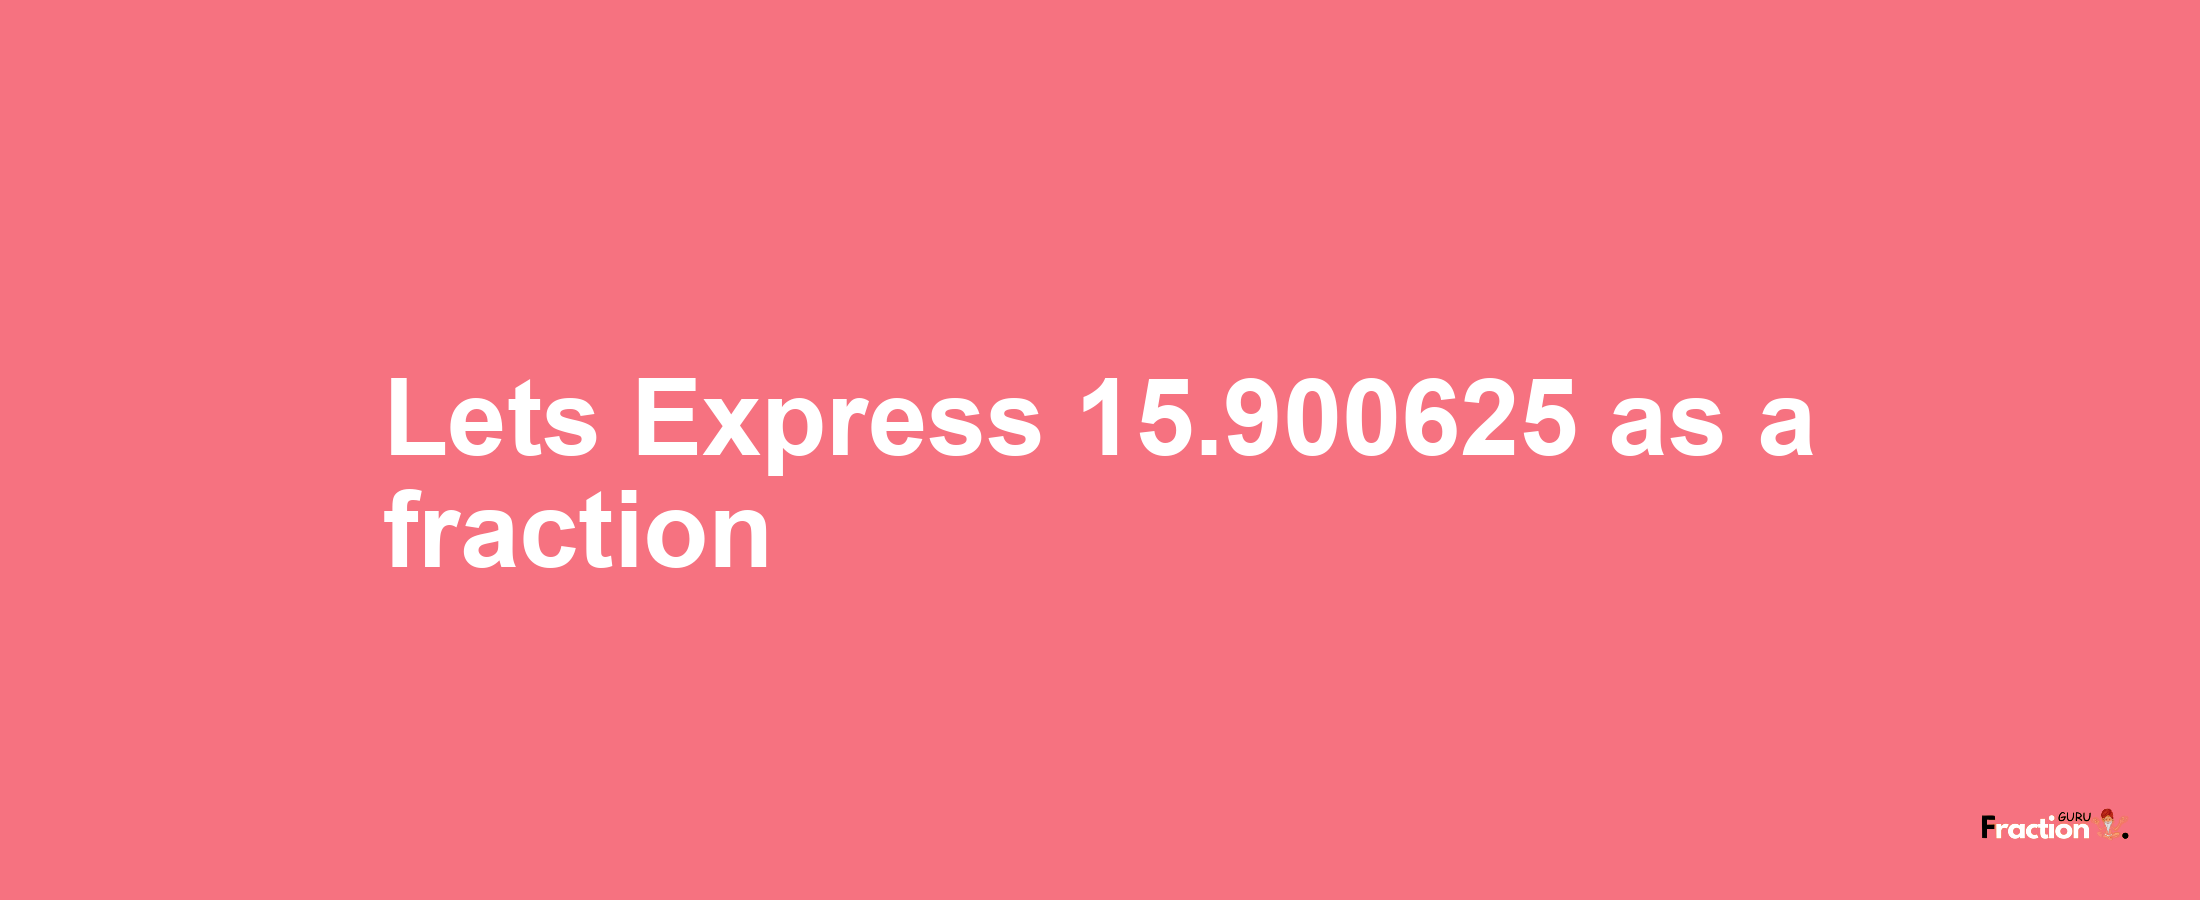 Lets Express 15.900625 as afraction